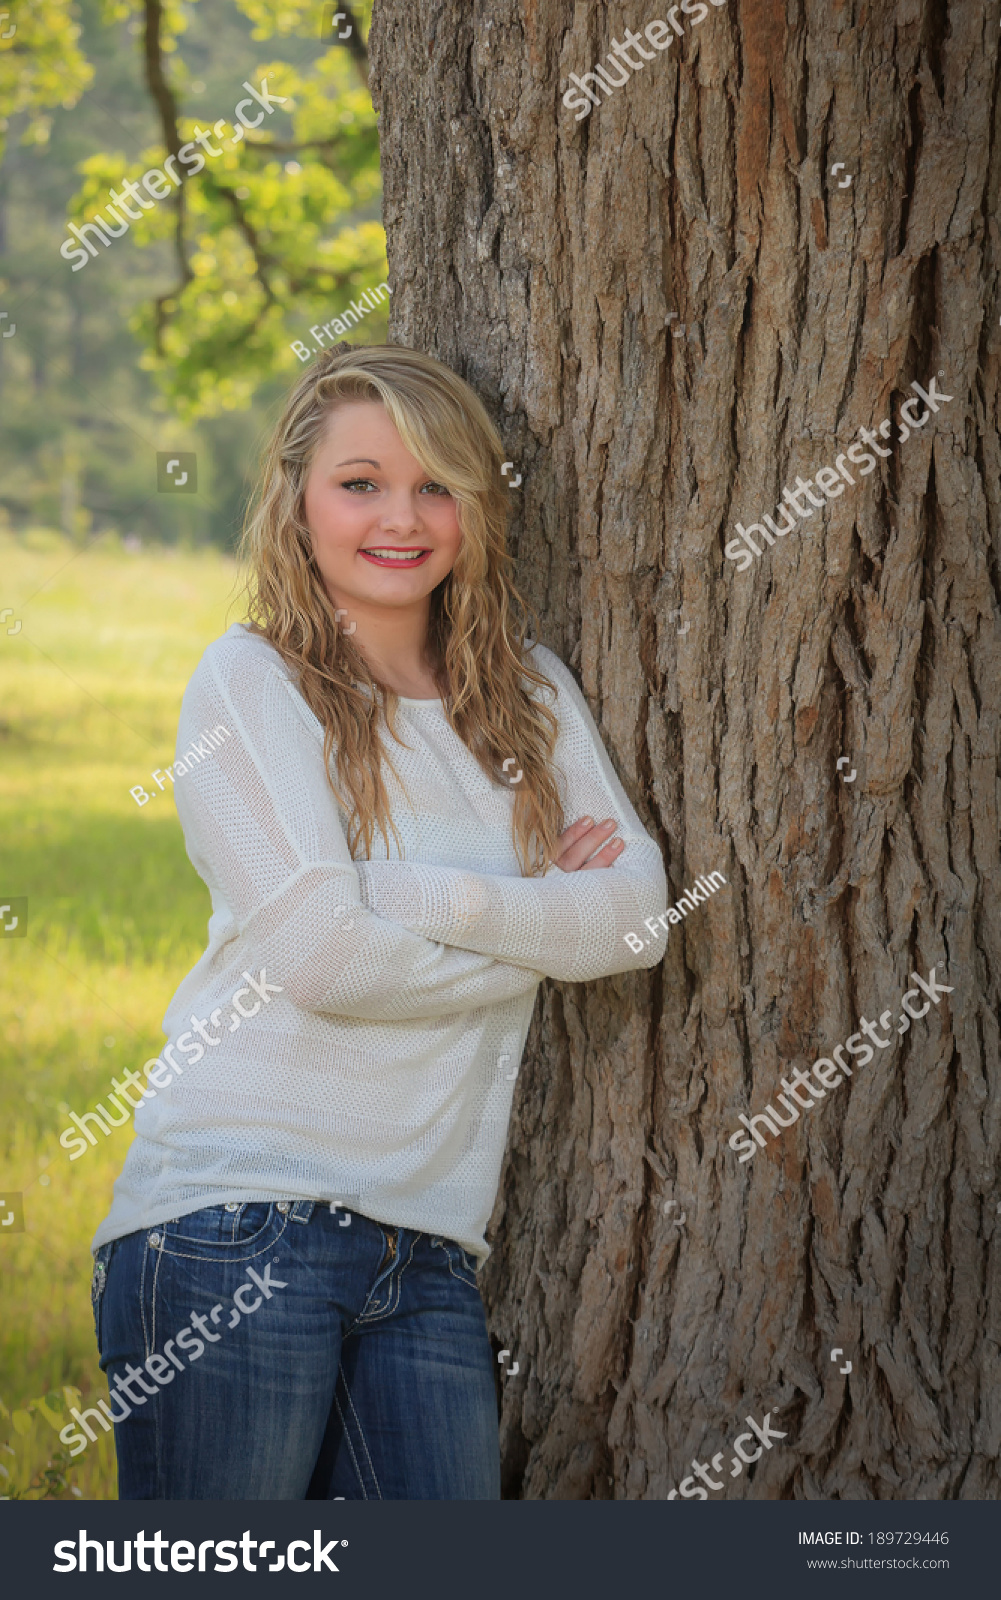 stock-photo-pretty-teen-girl-leaning-against-oak-tree-wearing-long-sleeve-white-sweater-and-blue-jeans-189729446.jpg